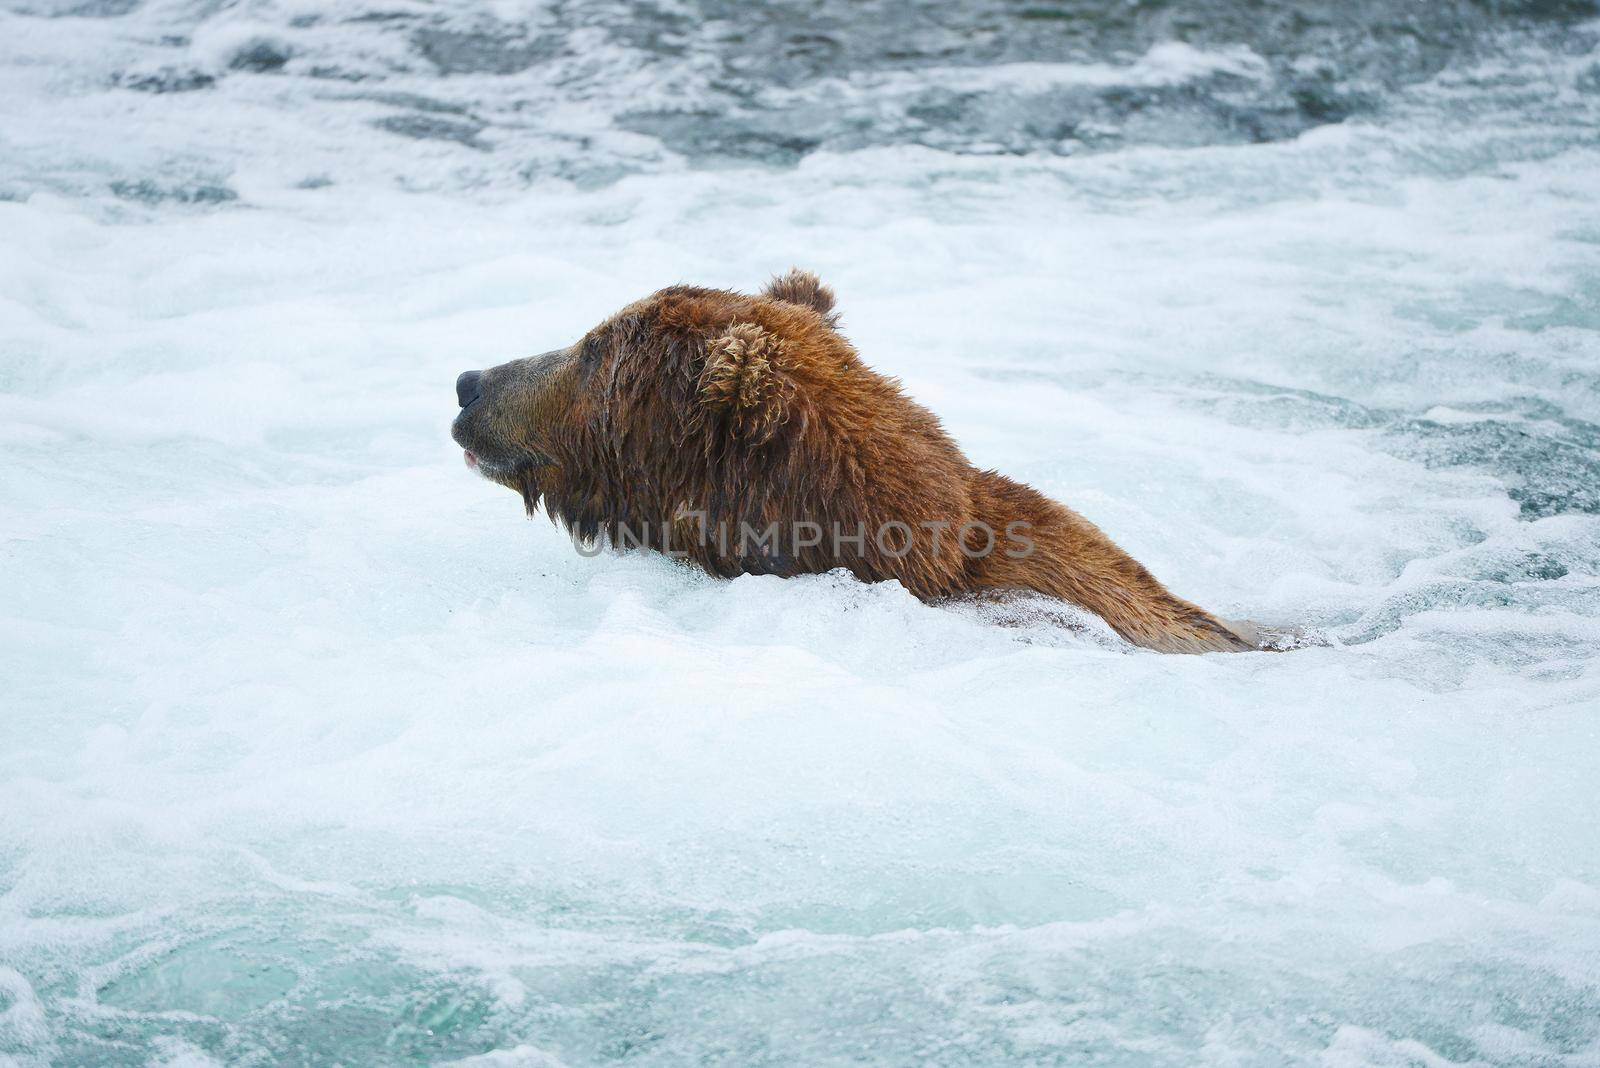 grizzly bear hunting salmon by porbital